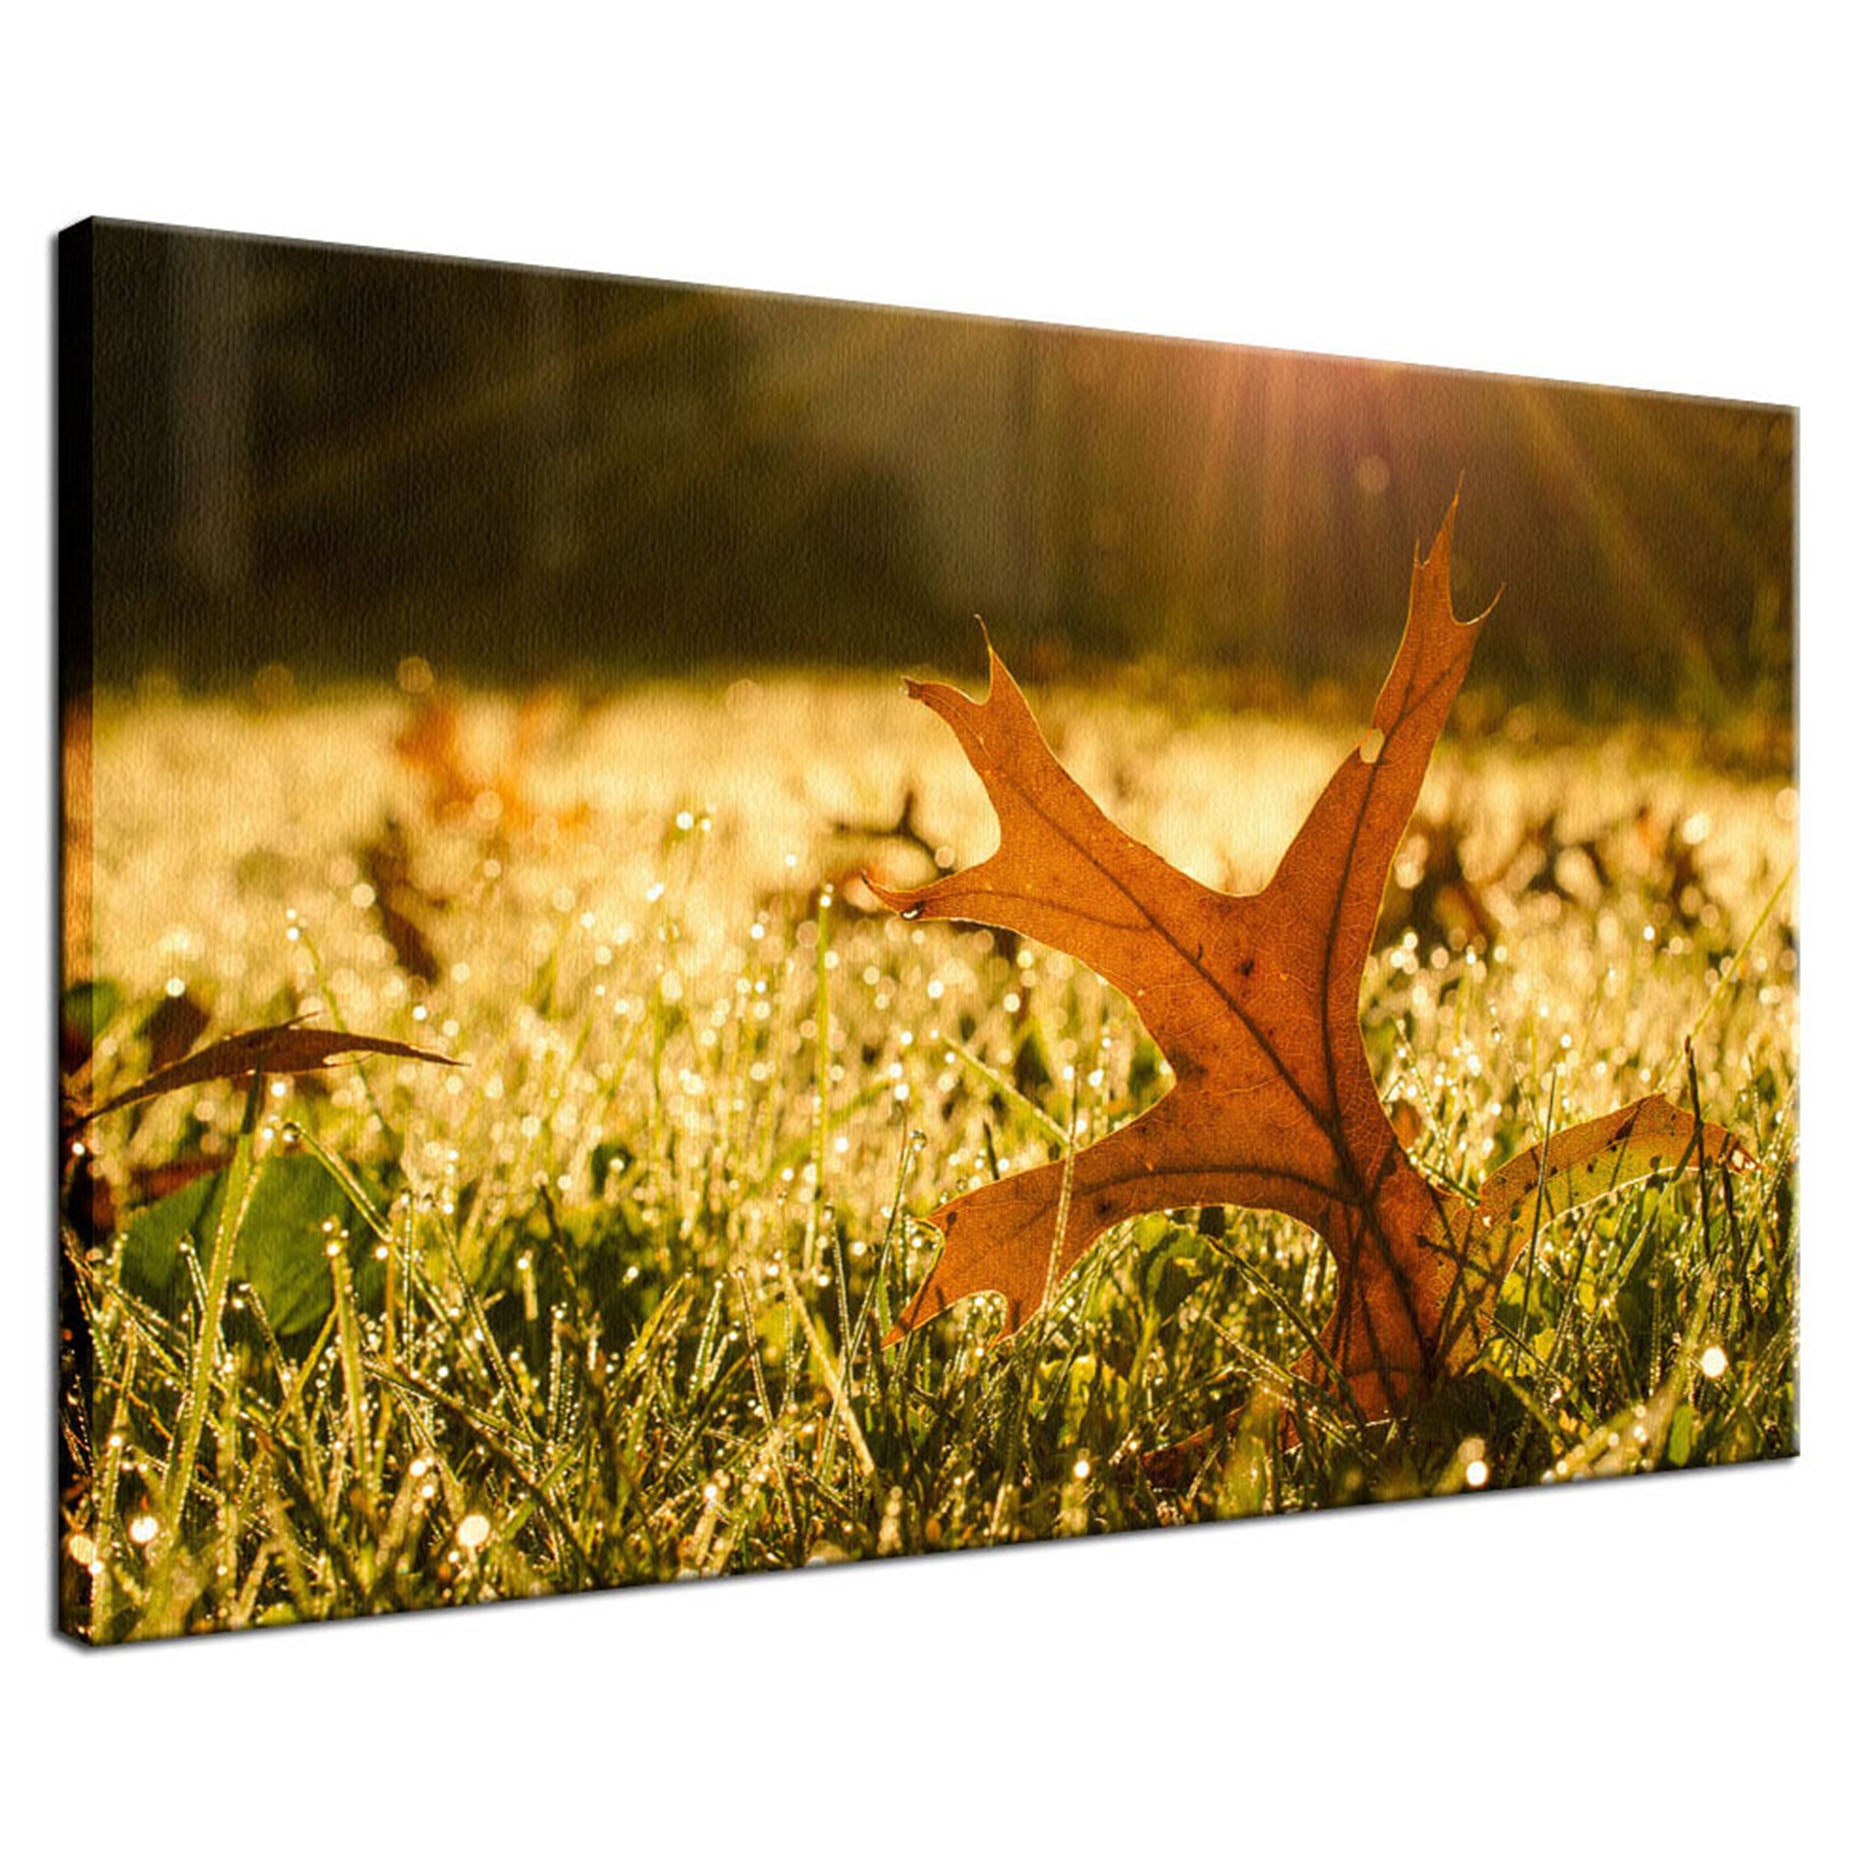 Fall Leaf in Morning Sun Botanical / Nature Photo Fine Art Canvas Wall Art Prints  - PIPAFINEART